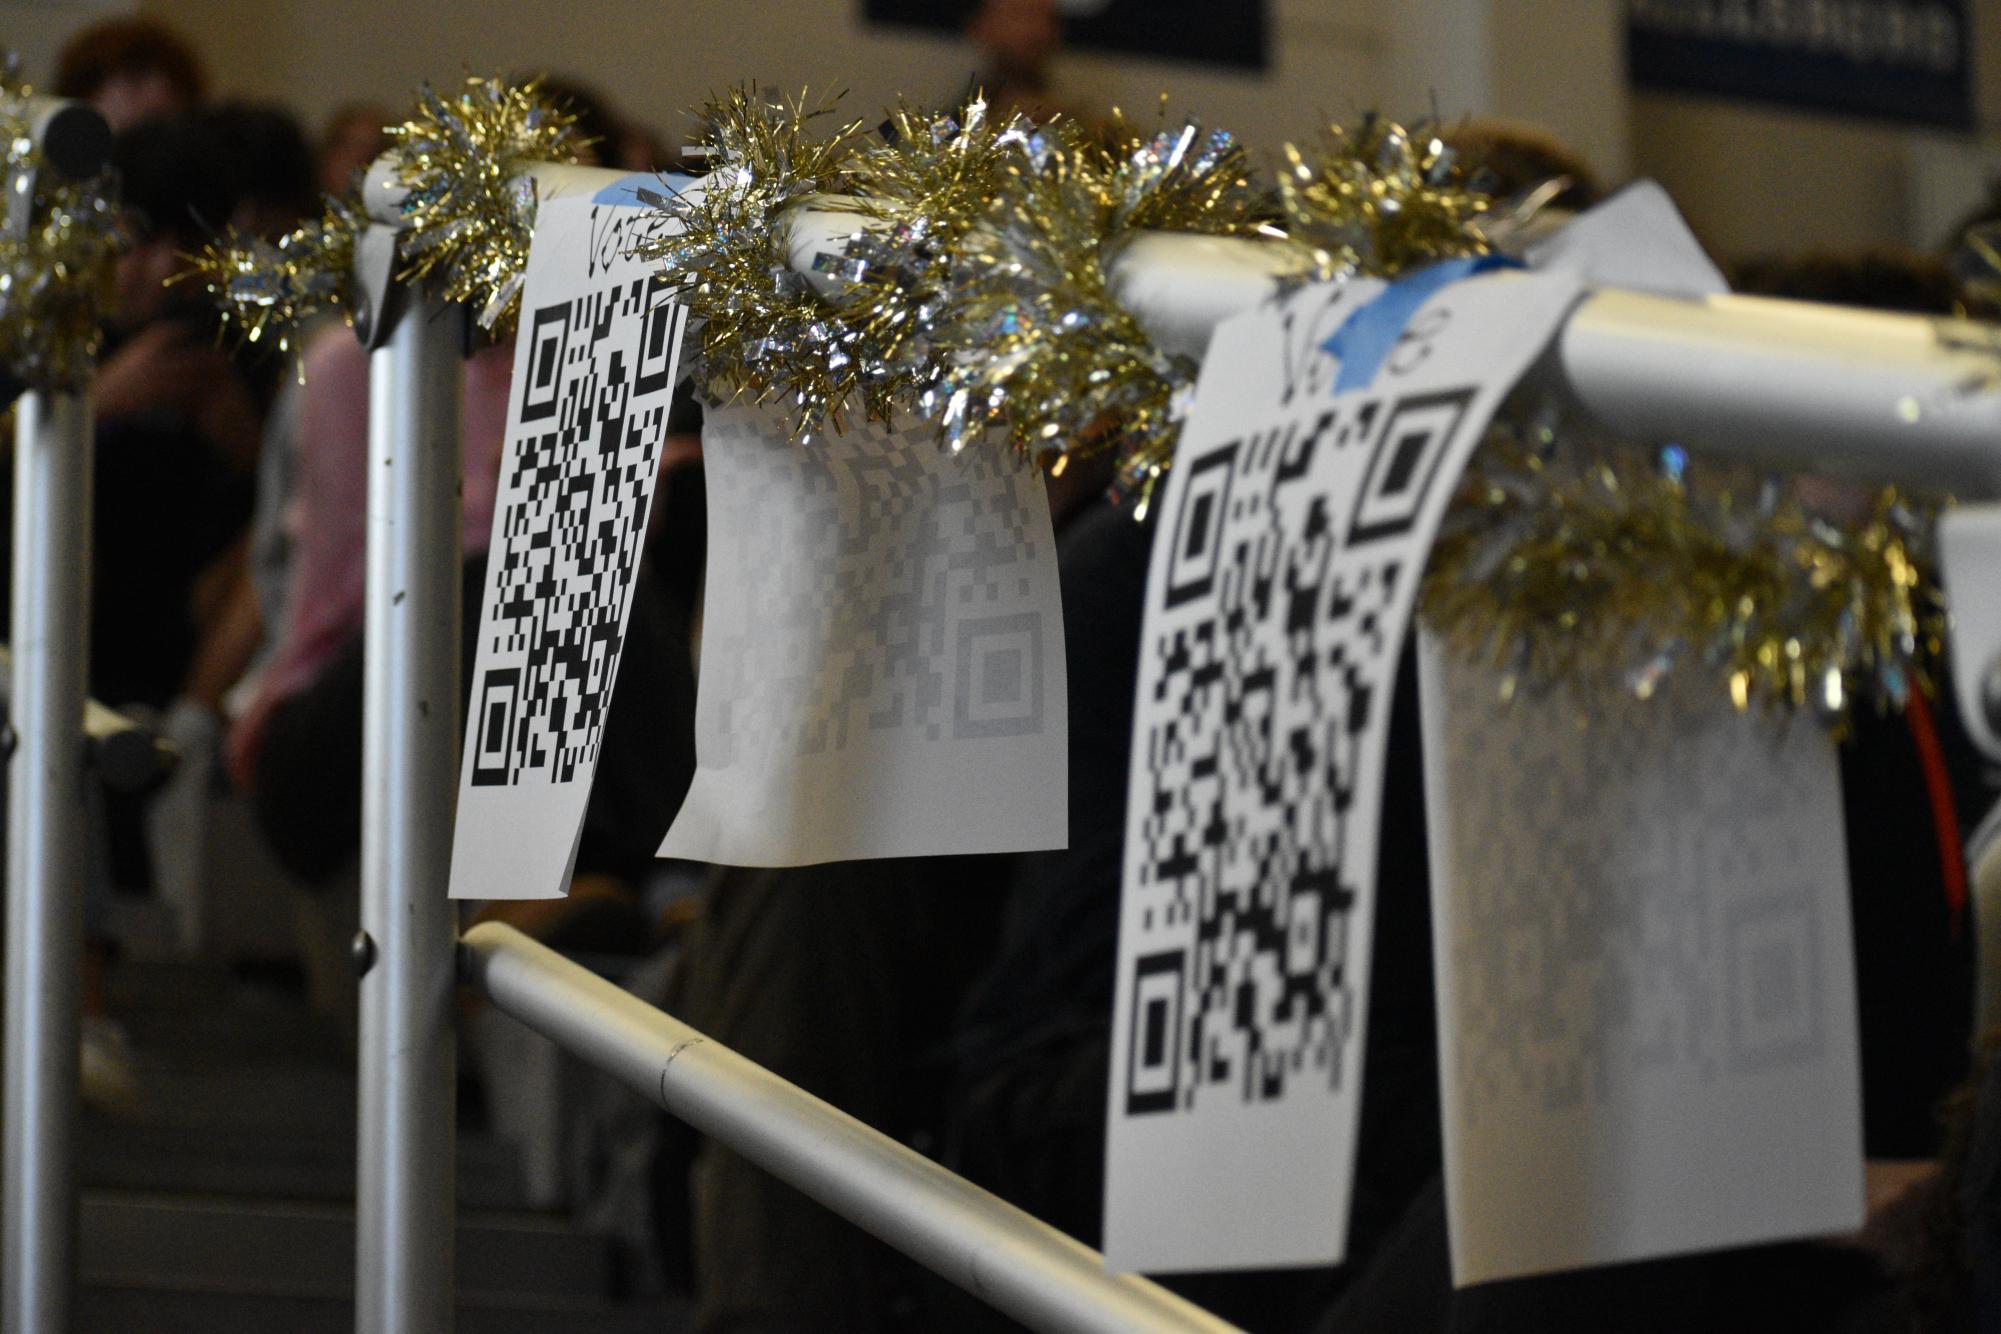 These QR code posters were hung all over the gym. Students scanned them at the conclusion of the talent portion.